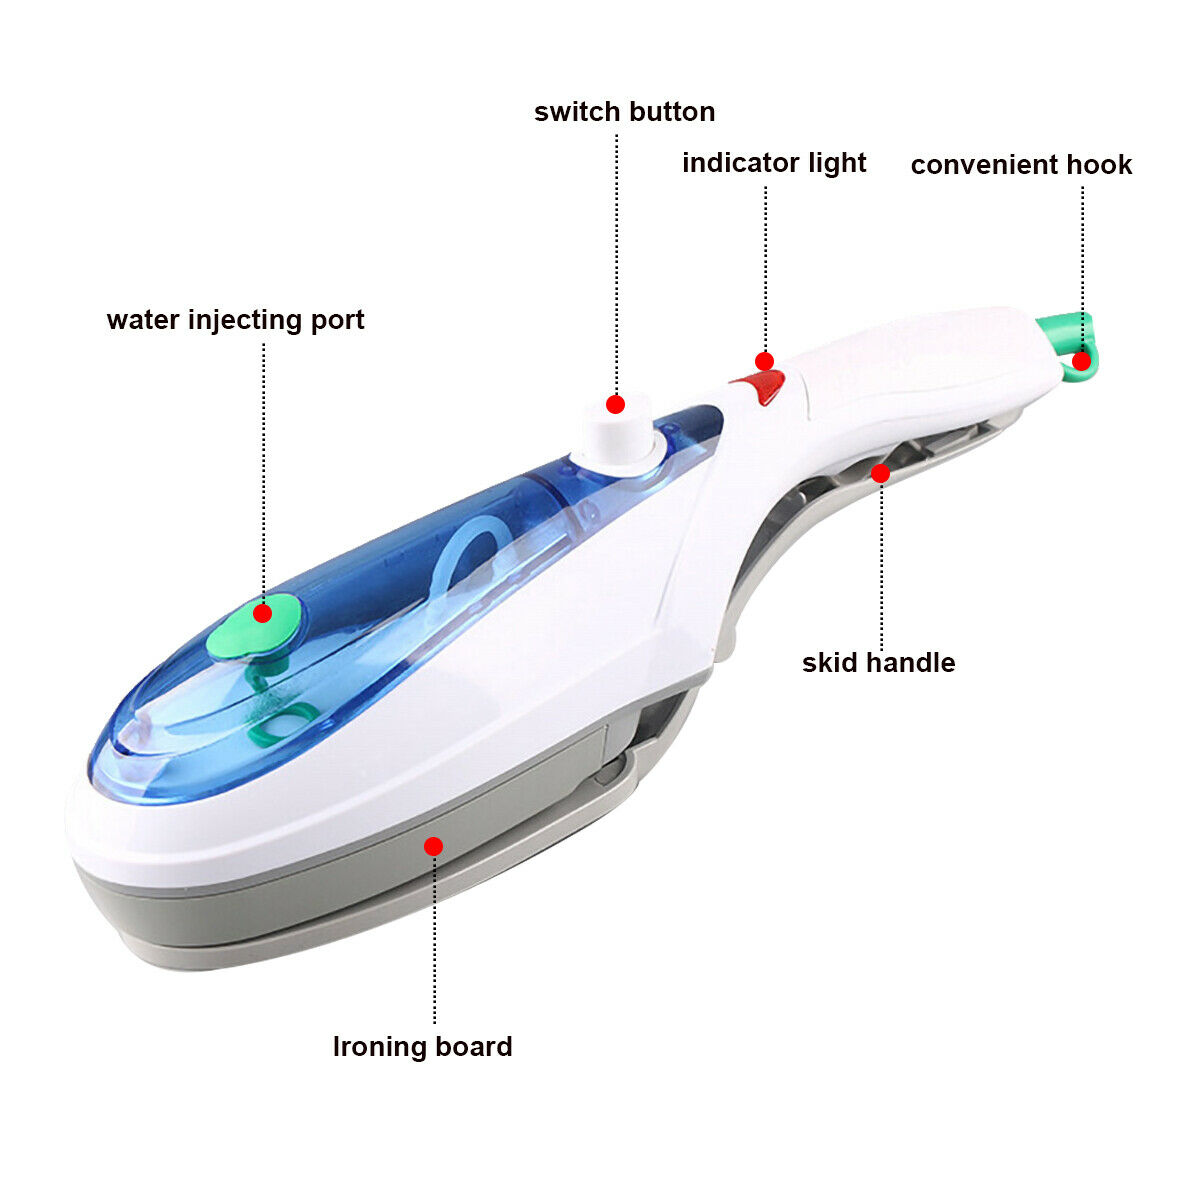 Protable-1000W-Electric-Steam-Iron-Handheld-Fabric-Laundry-Steamer-Brush-Travel-Soldering-Iron-Tips-1589841-4